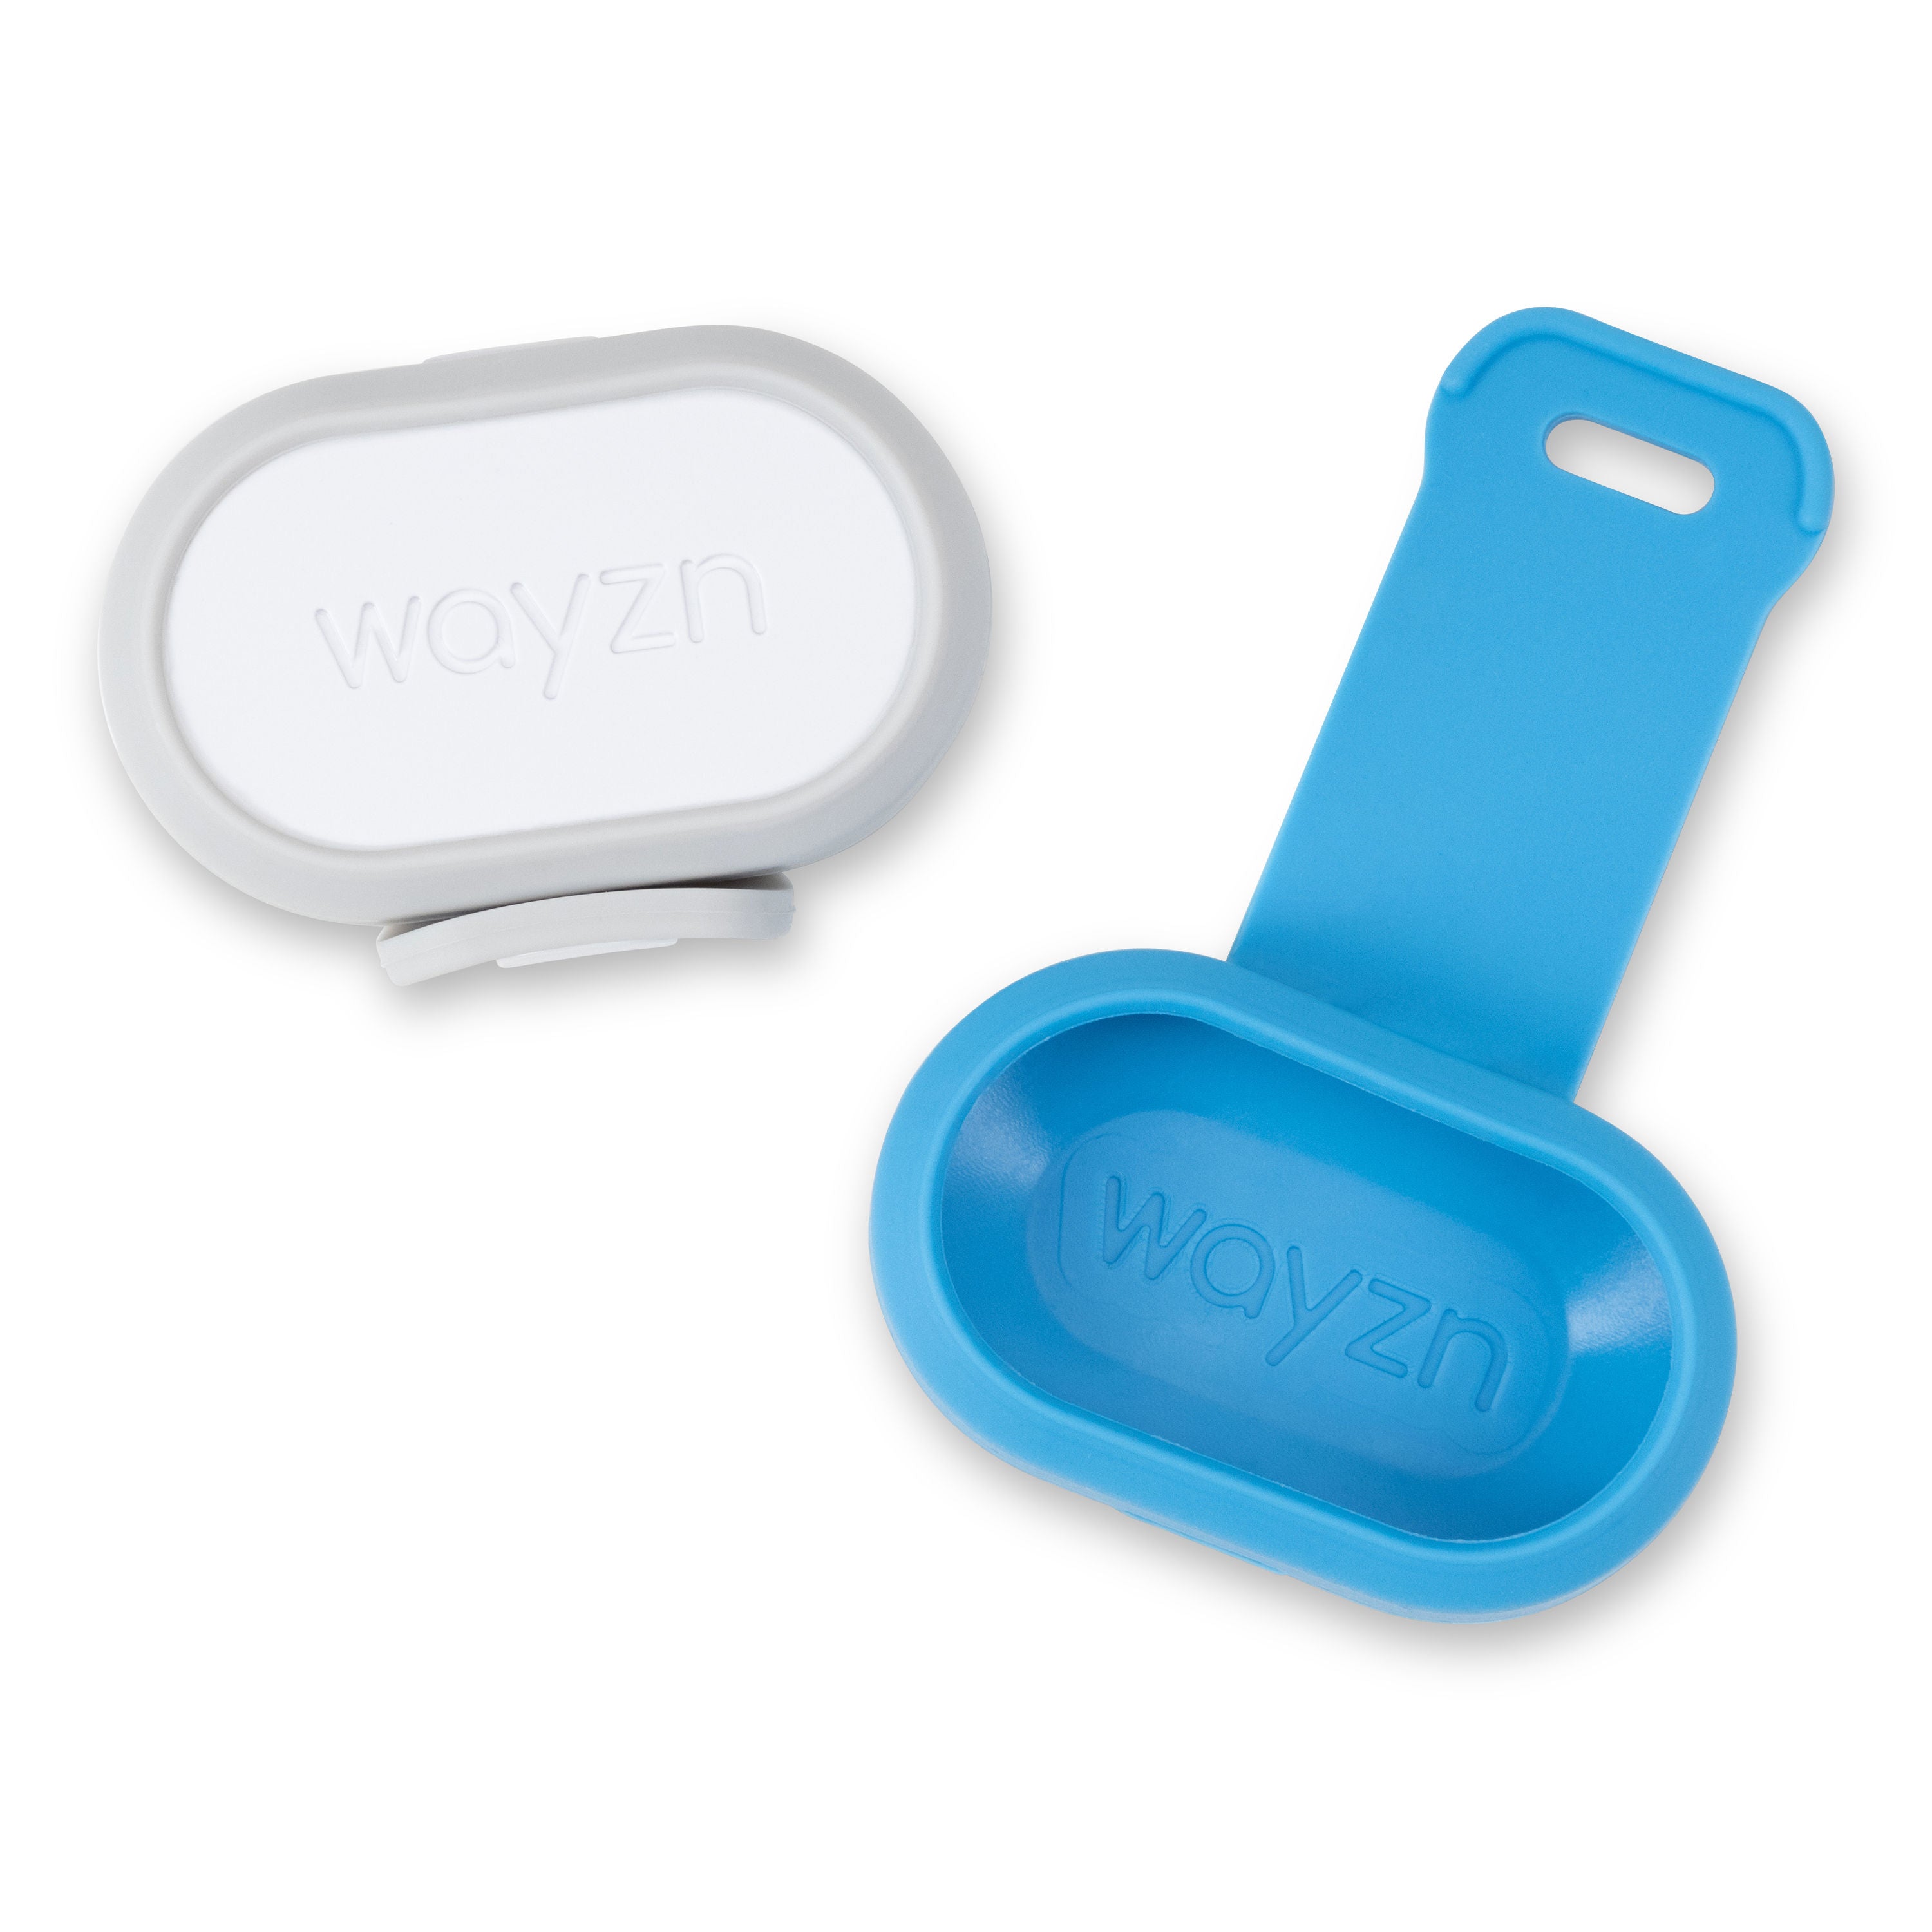 Wayzn extra pet tag come with two straps